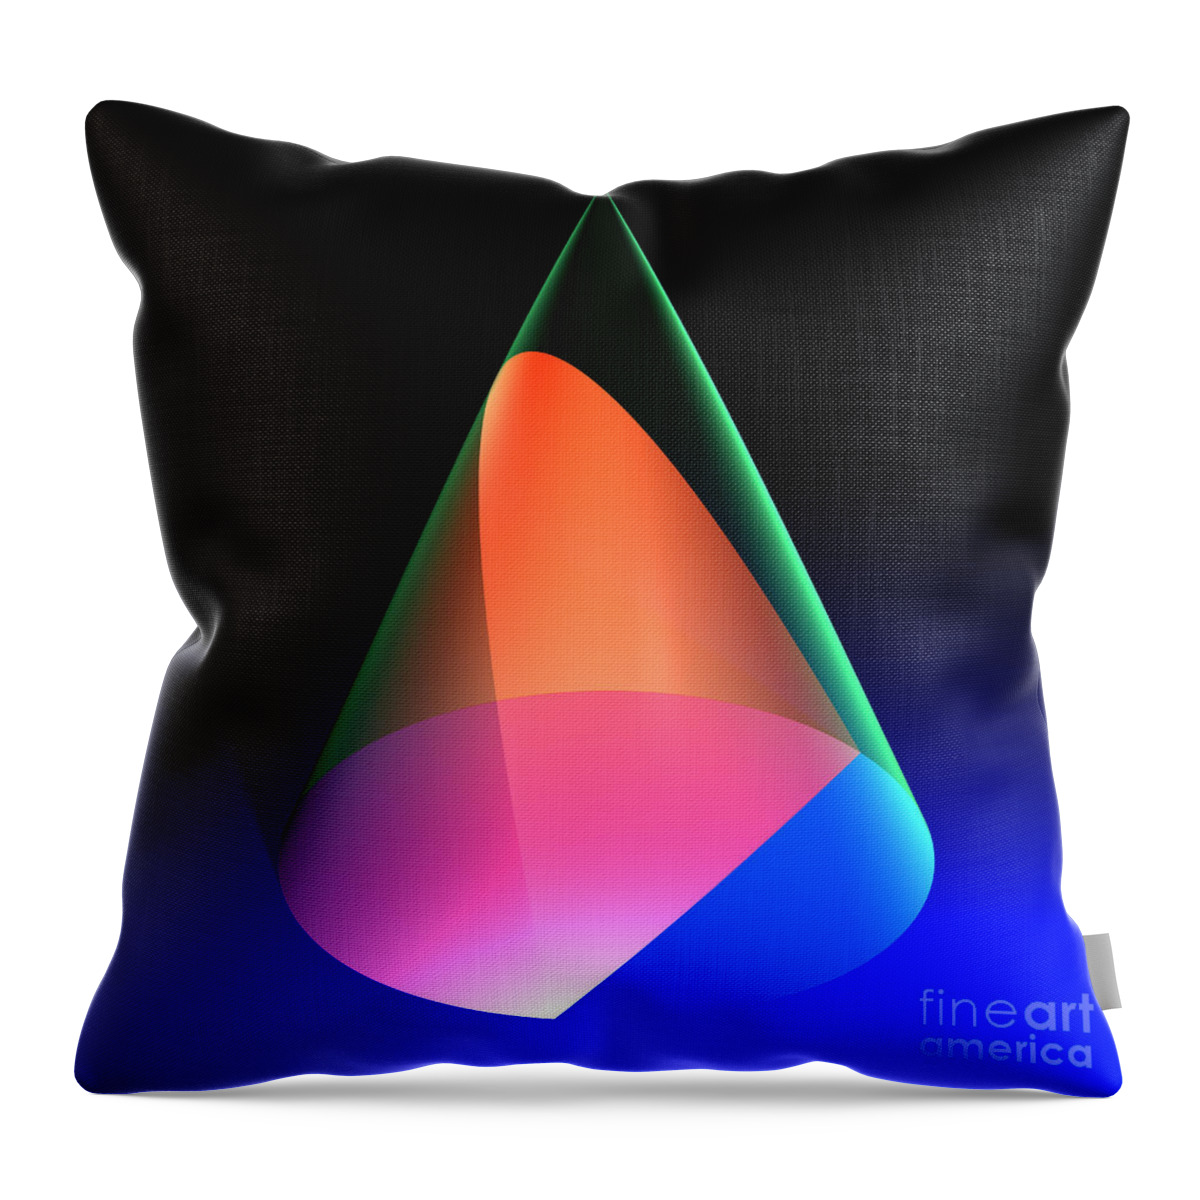 Circle Throw Pillow featuring the digital art Conic Section Parabola 6 by Russell Kightley